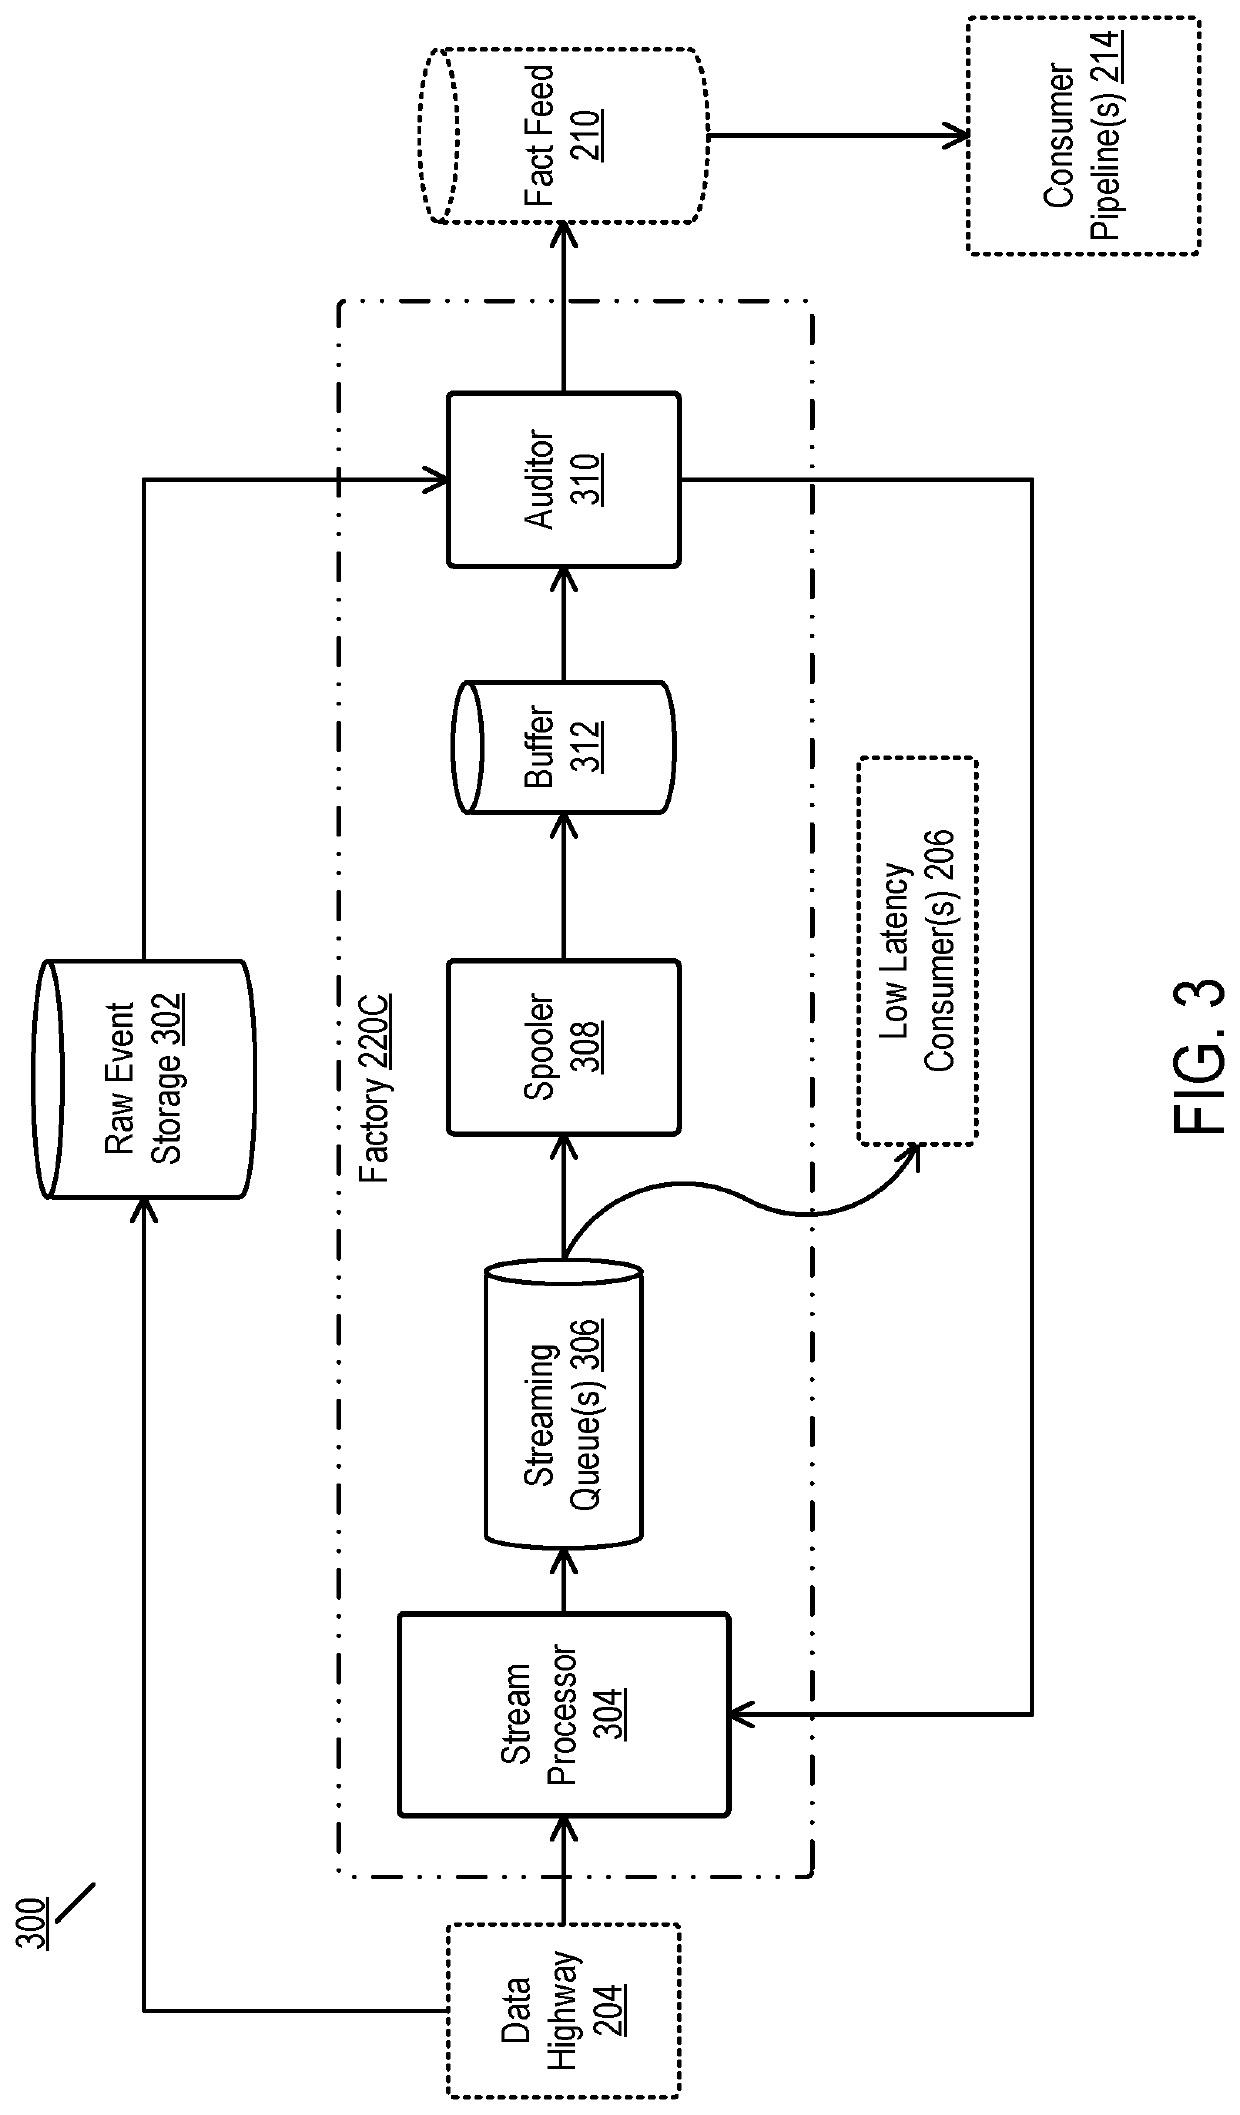 Partitioned backing store implemented in a distributed database